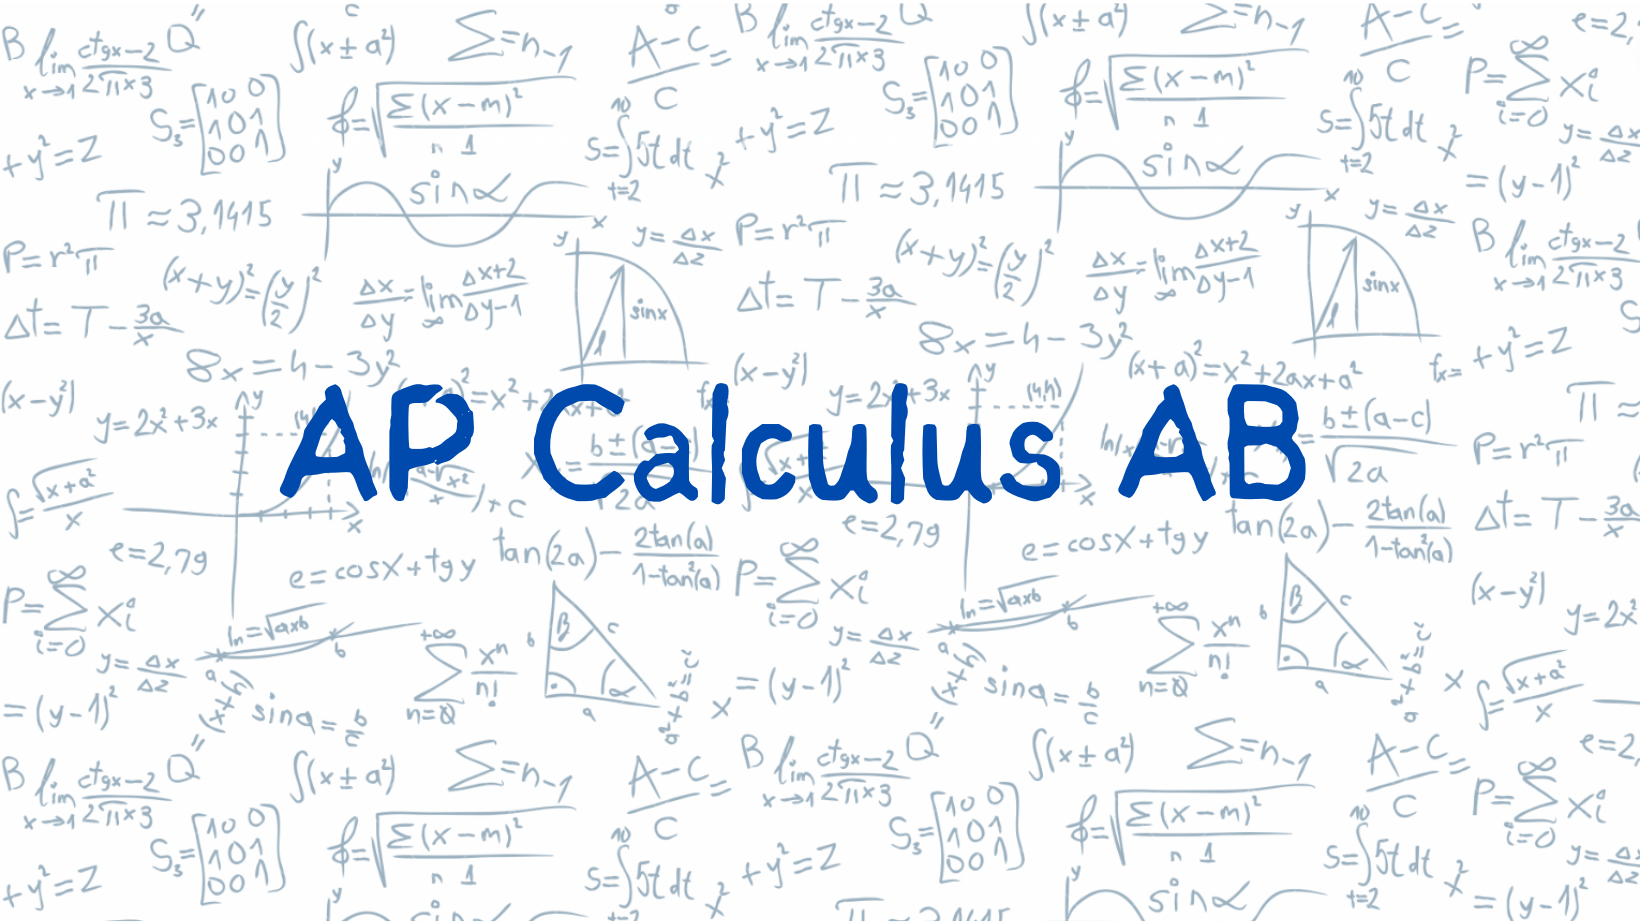 Image presenting AP Calculus AB with mathematical symbols and graphs in the background.